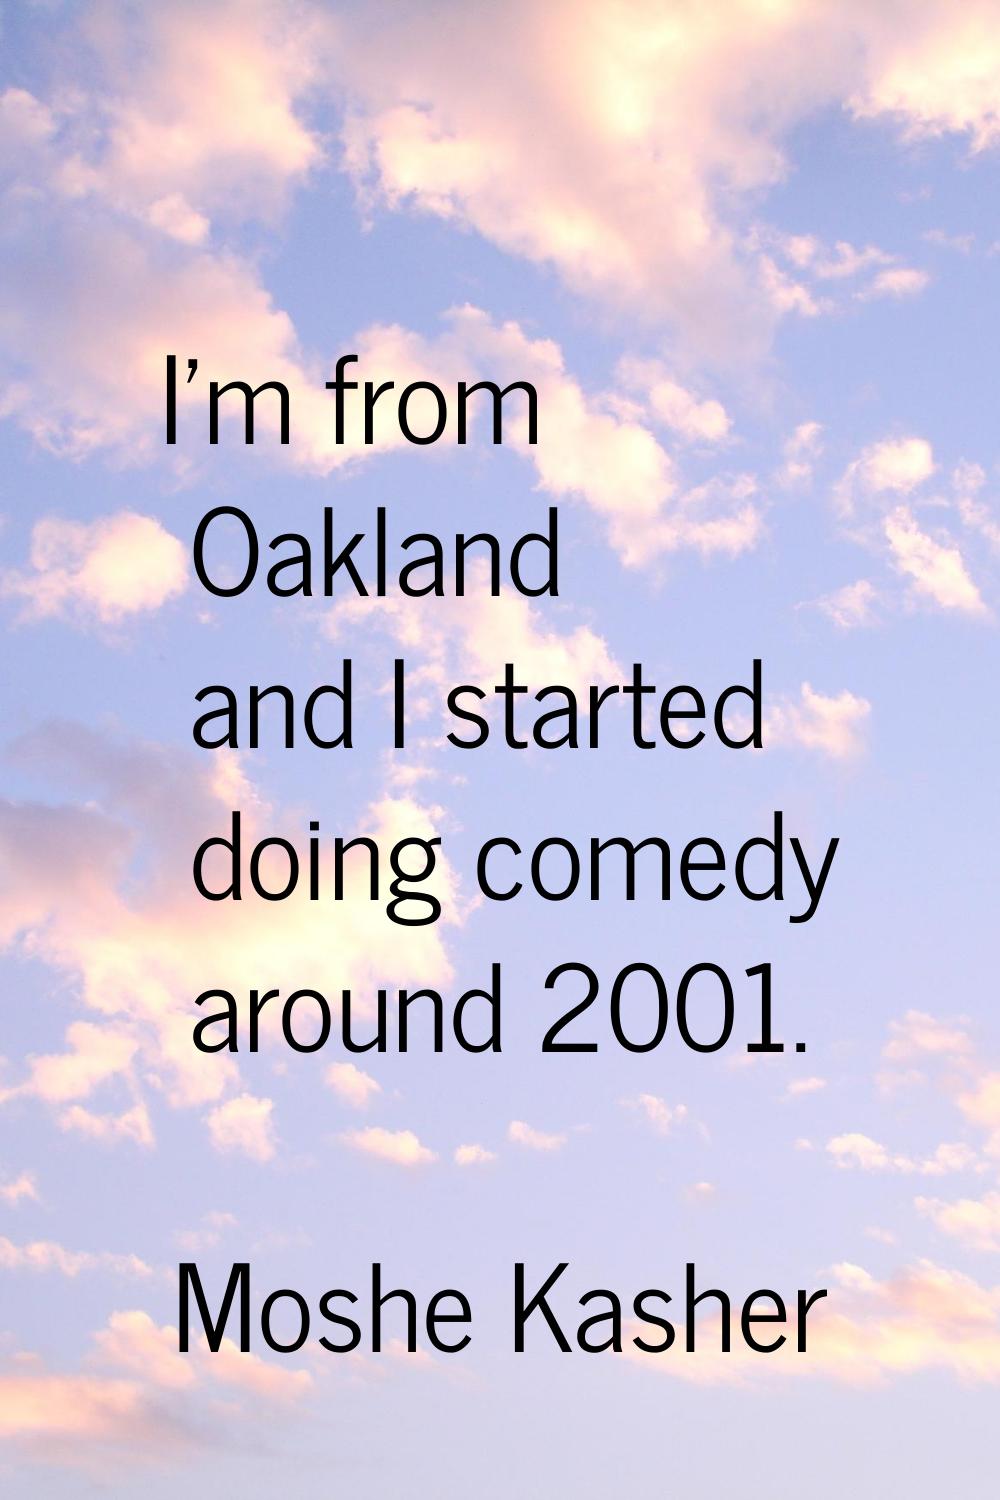 I'm from Oakland and I started doing comedy around 2001.